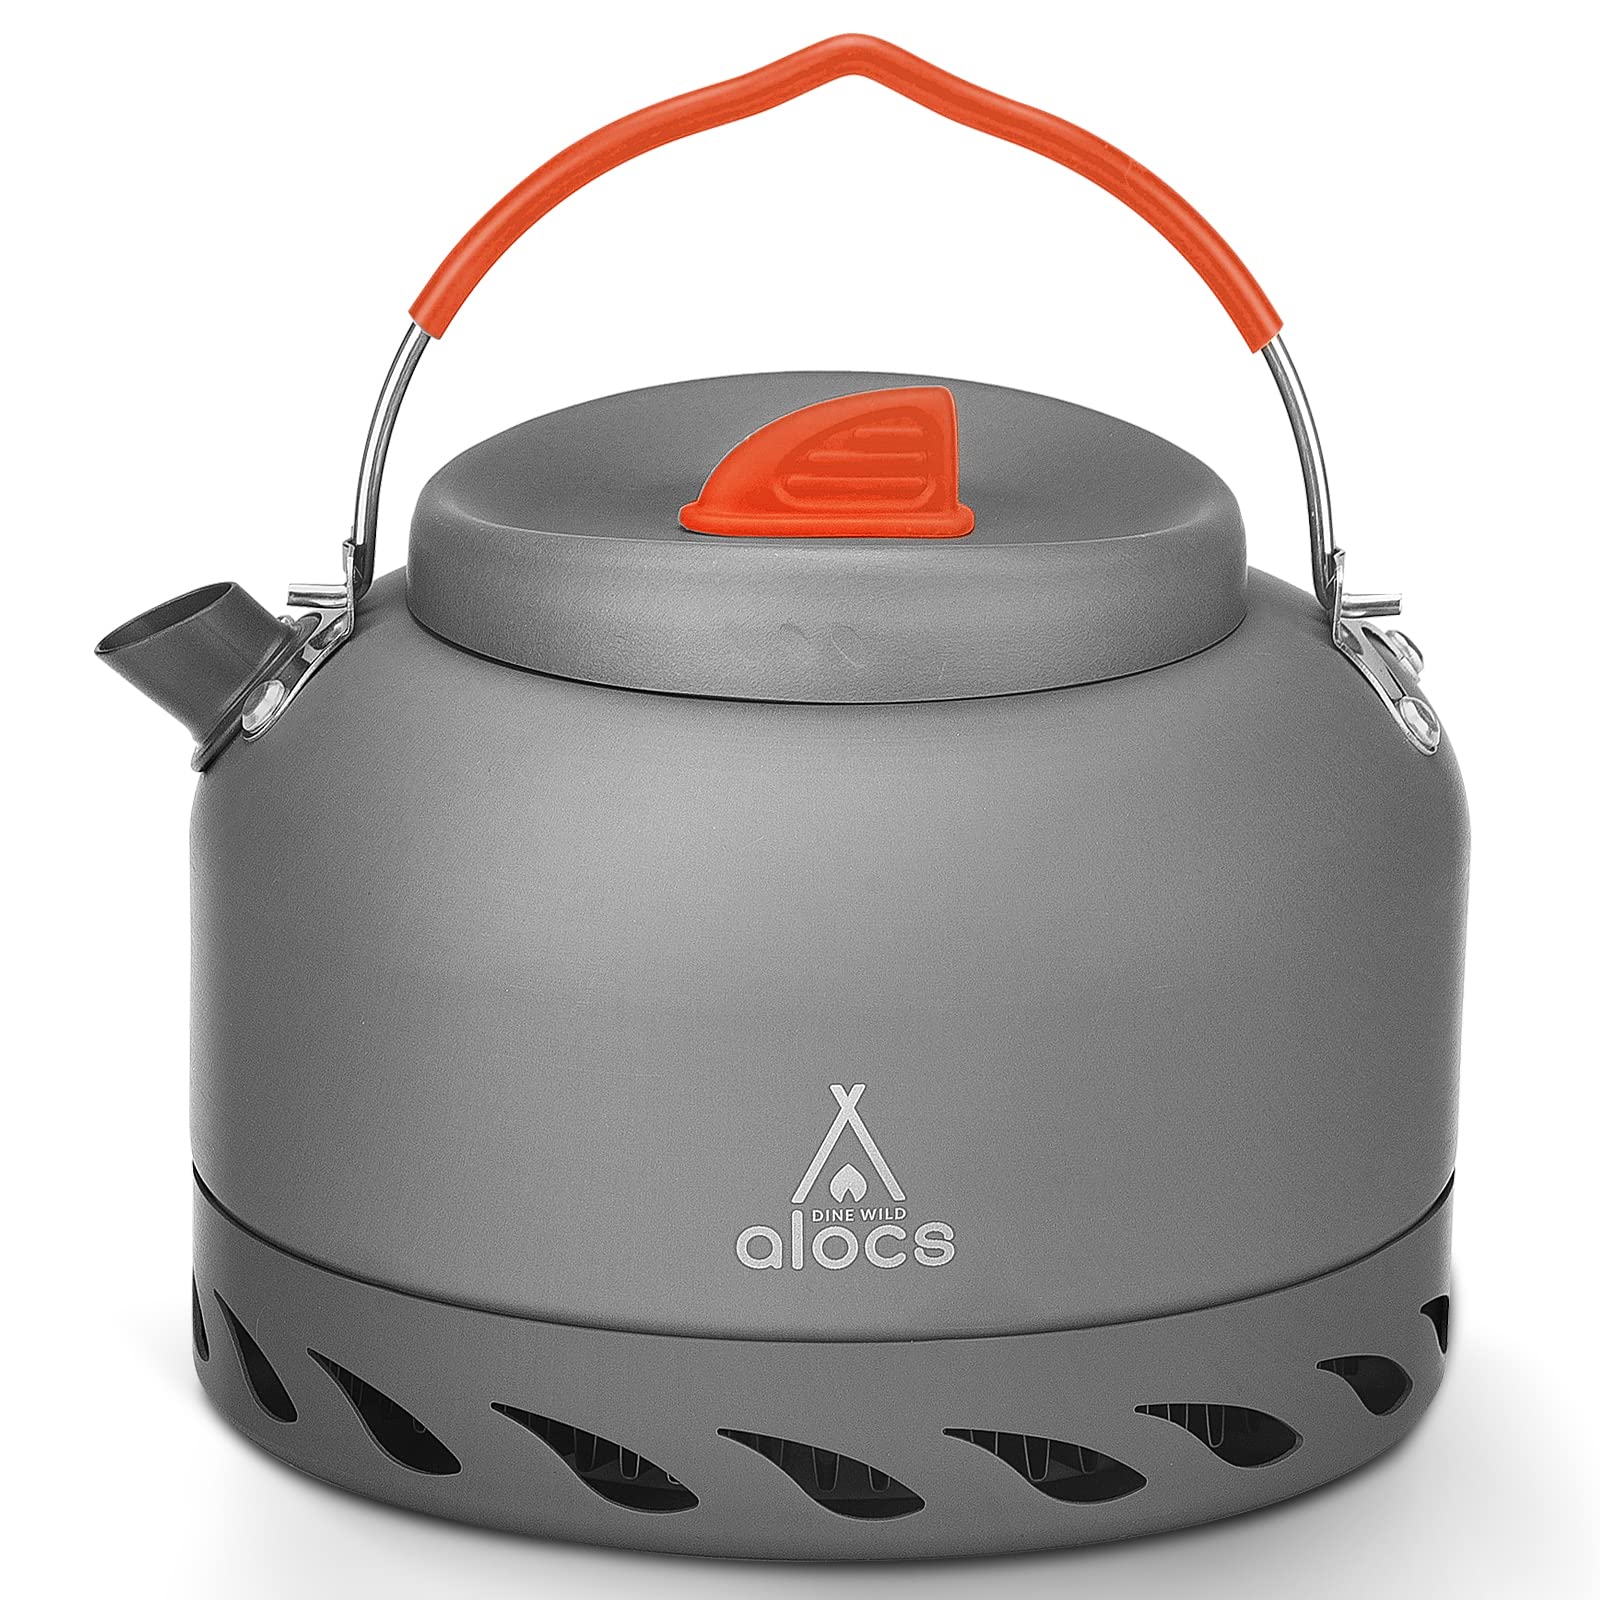 Alocs 1.3L Camping Kettle with Heat Exchanger Aluminum Portable Camping Tea  Kettle Compact Outdoor Hiking Picnic Camping Water Kettle Lightweight Teapot  Coffee Pot